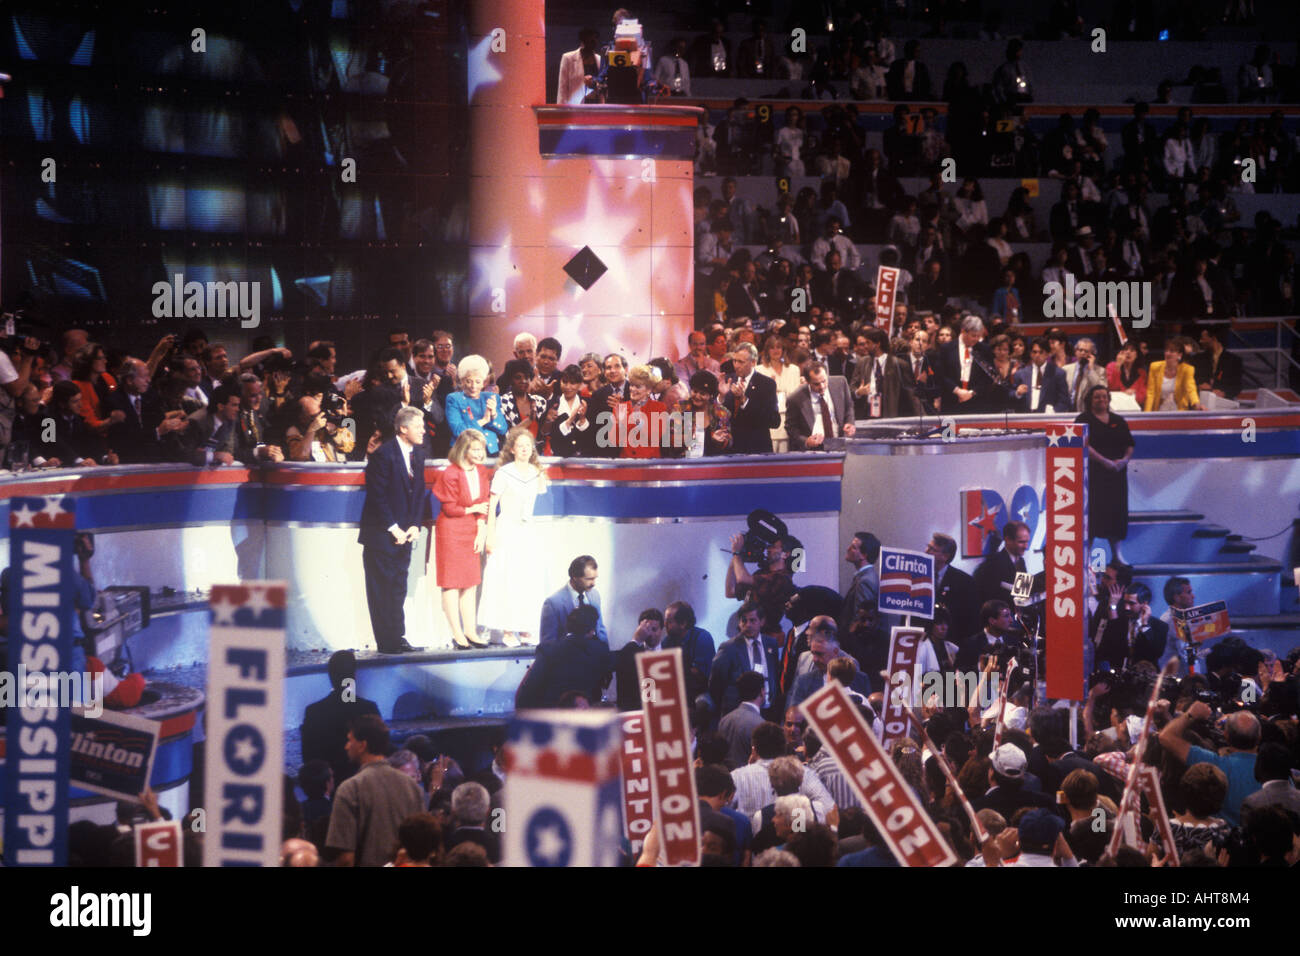 The Clinton family accepts the nomination at the 1992 Democratic National Convention at Madison Square Garden New York Stock Photo